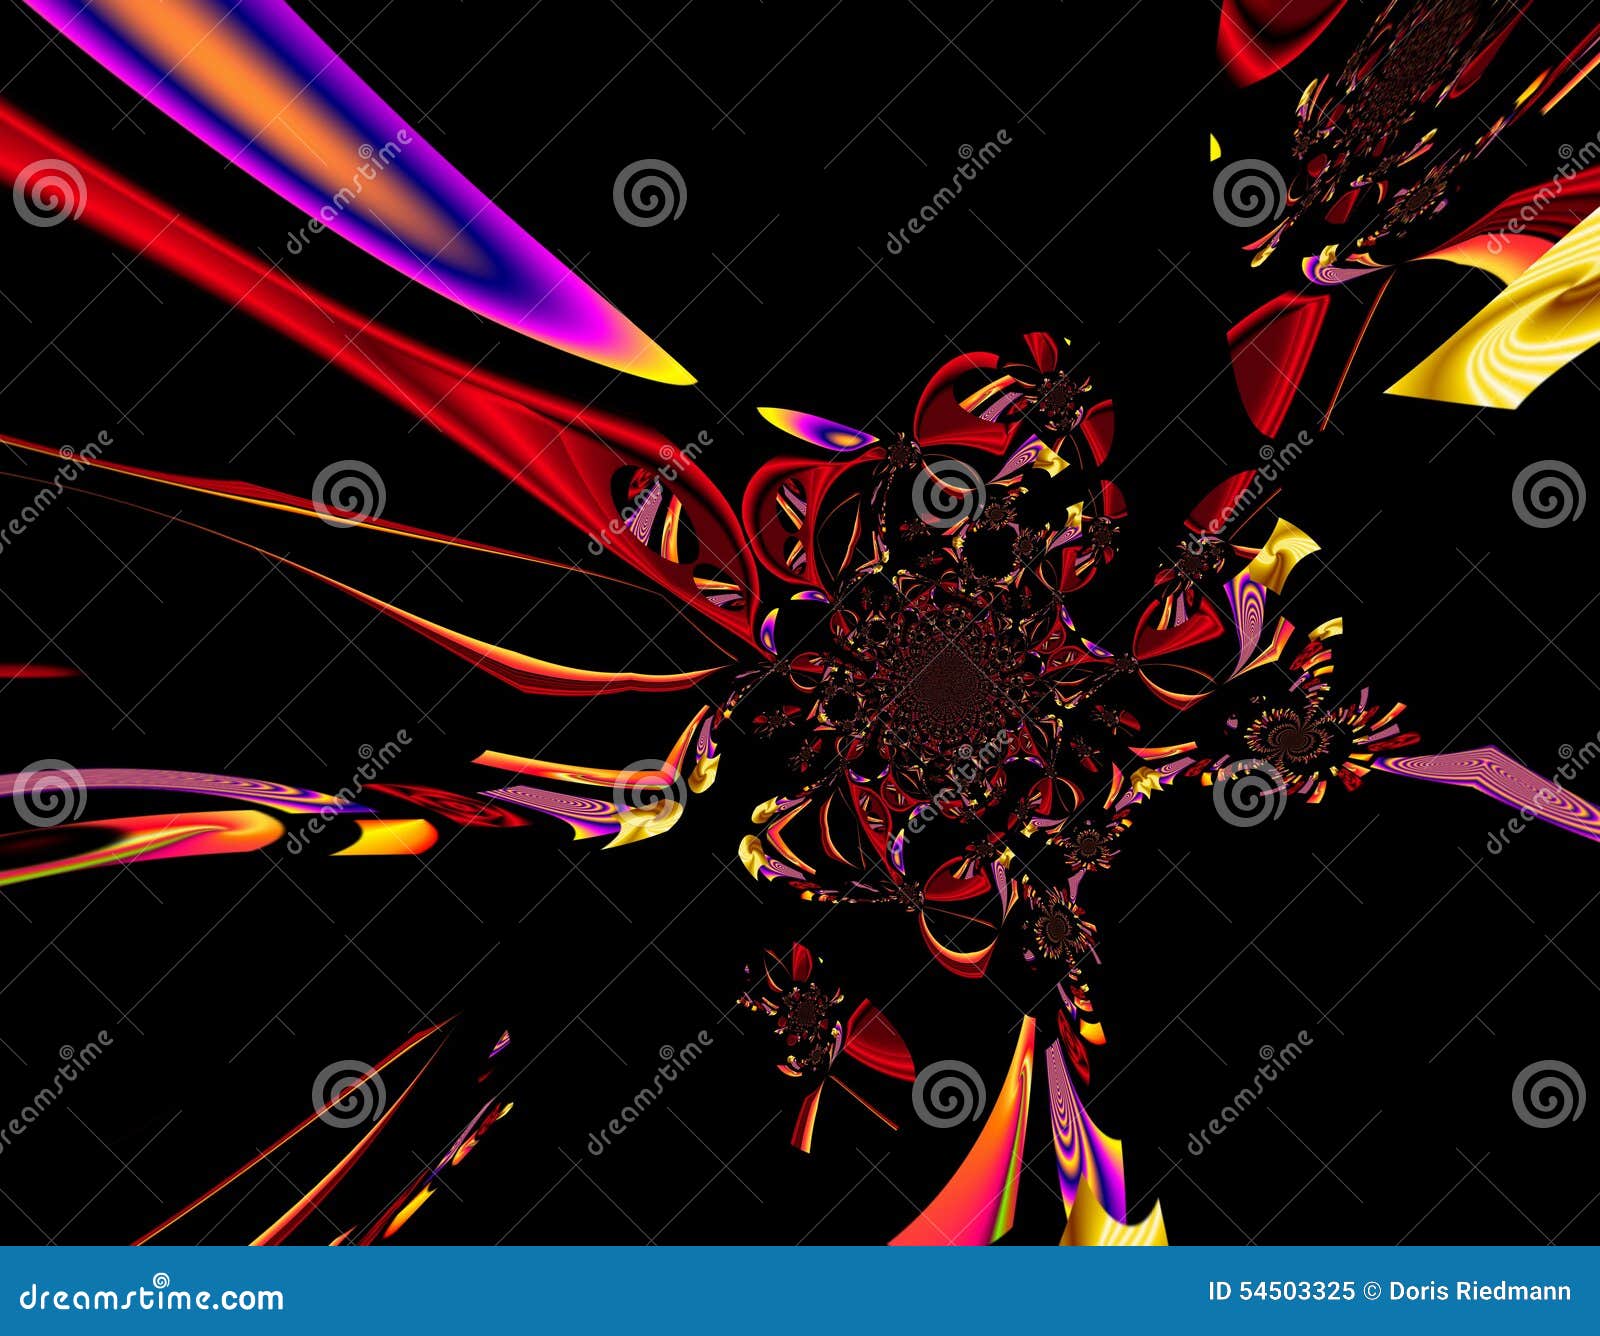 Grafik Design Art Abstract Colorful Painting Pictures New Art Stock Illustration Illustration Of Painting Design